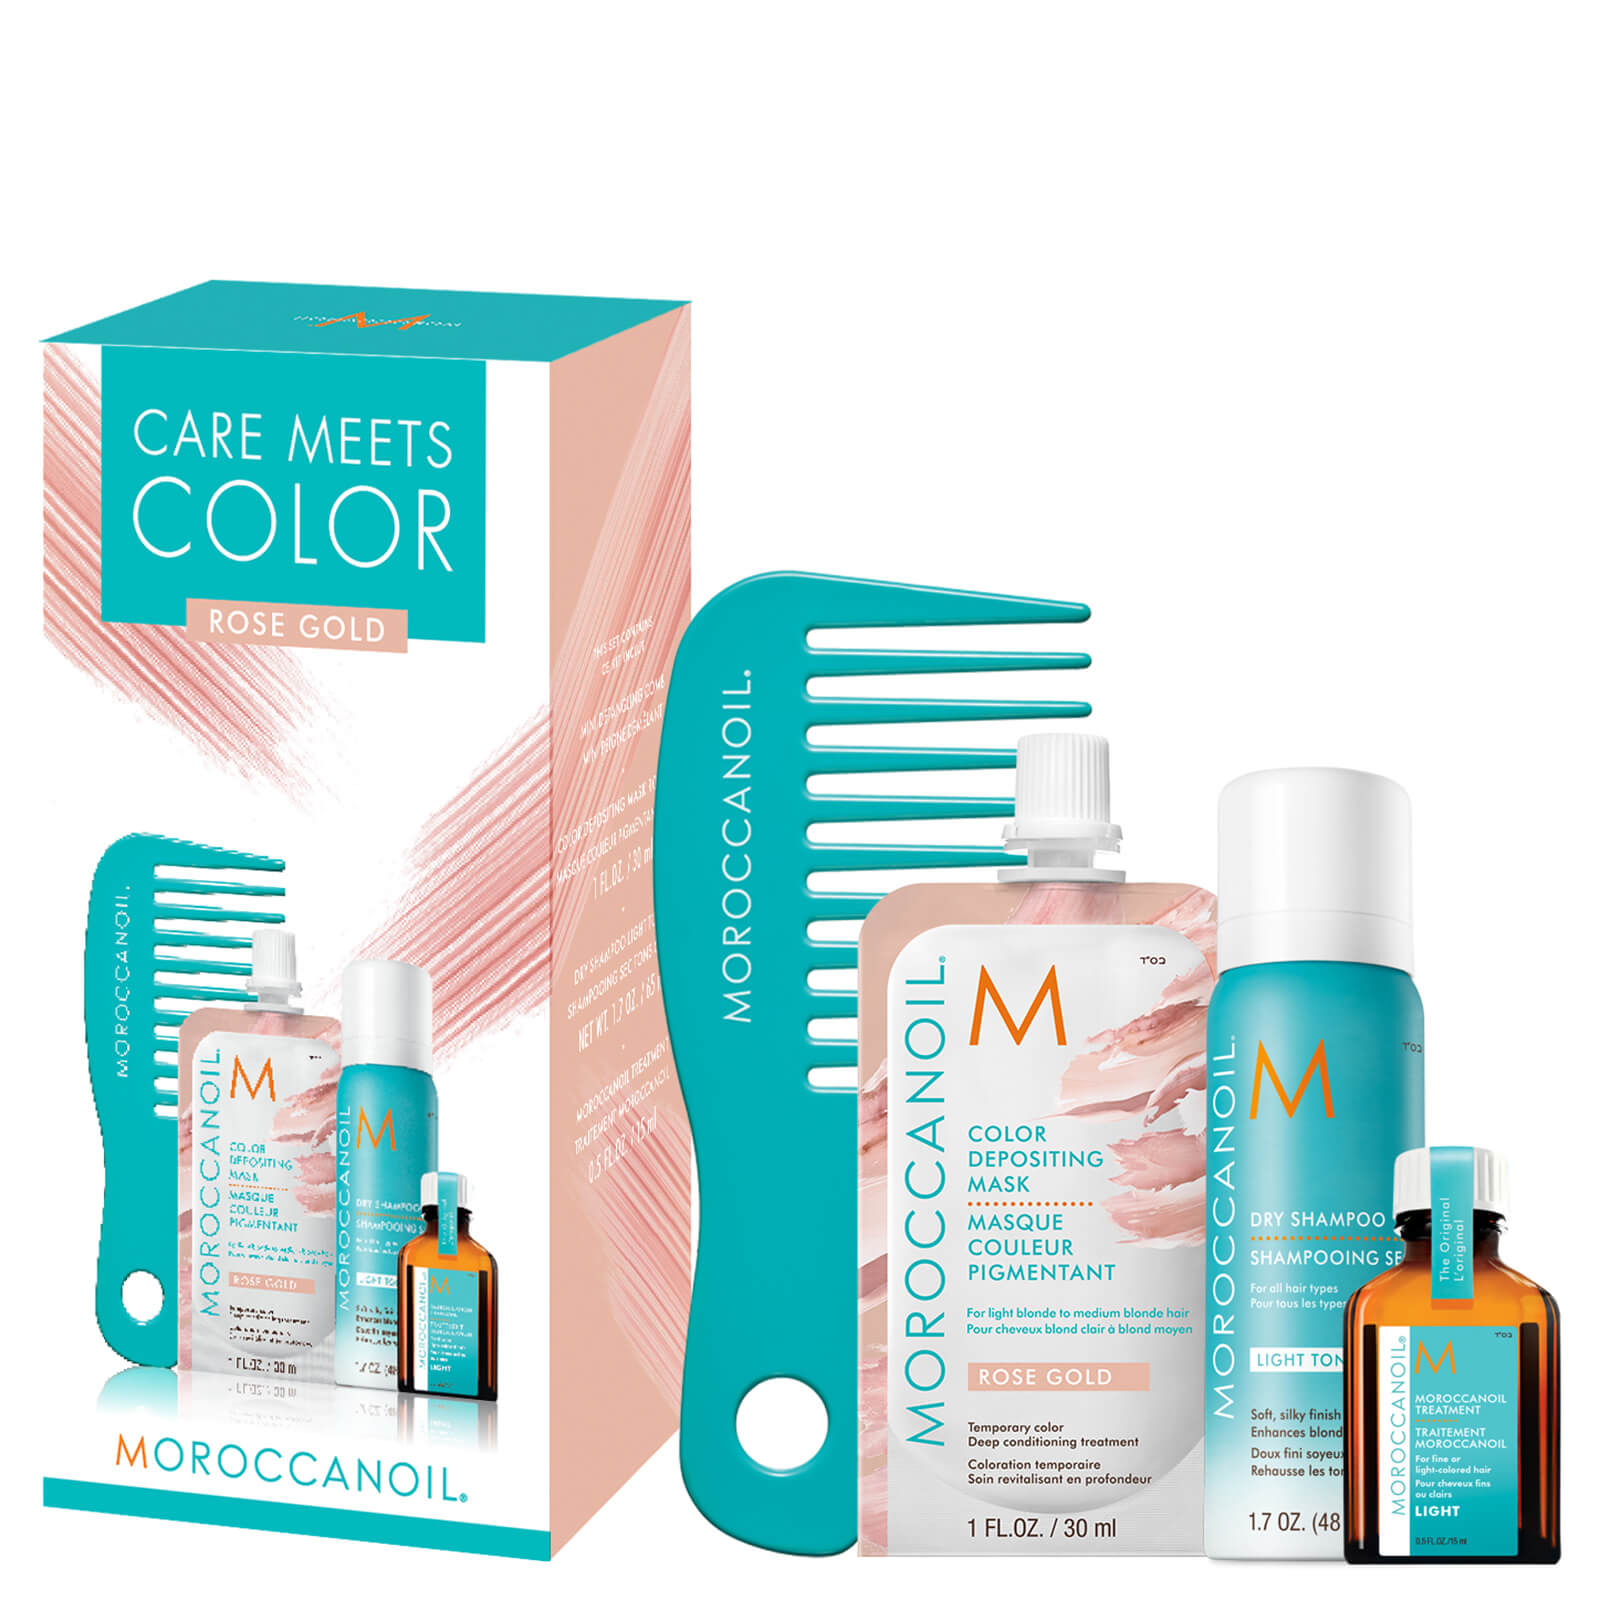 Moroccanoil Care Meets Colour Blonde Bundle with Free Comb - Rose Gold